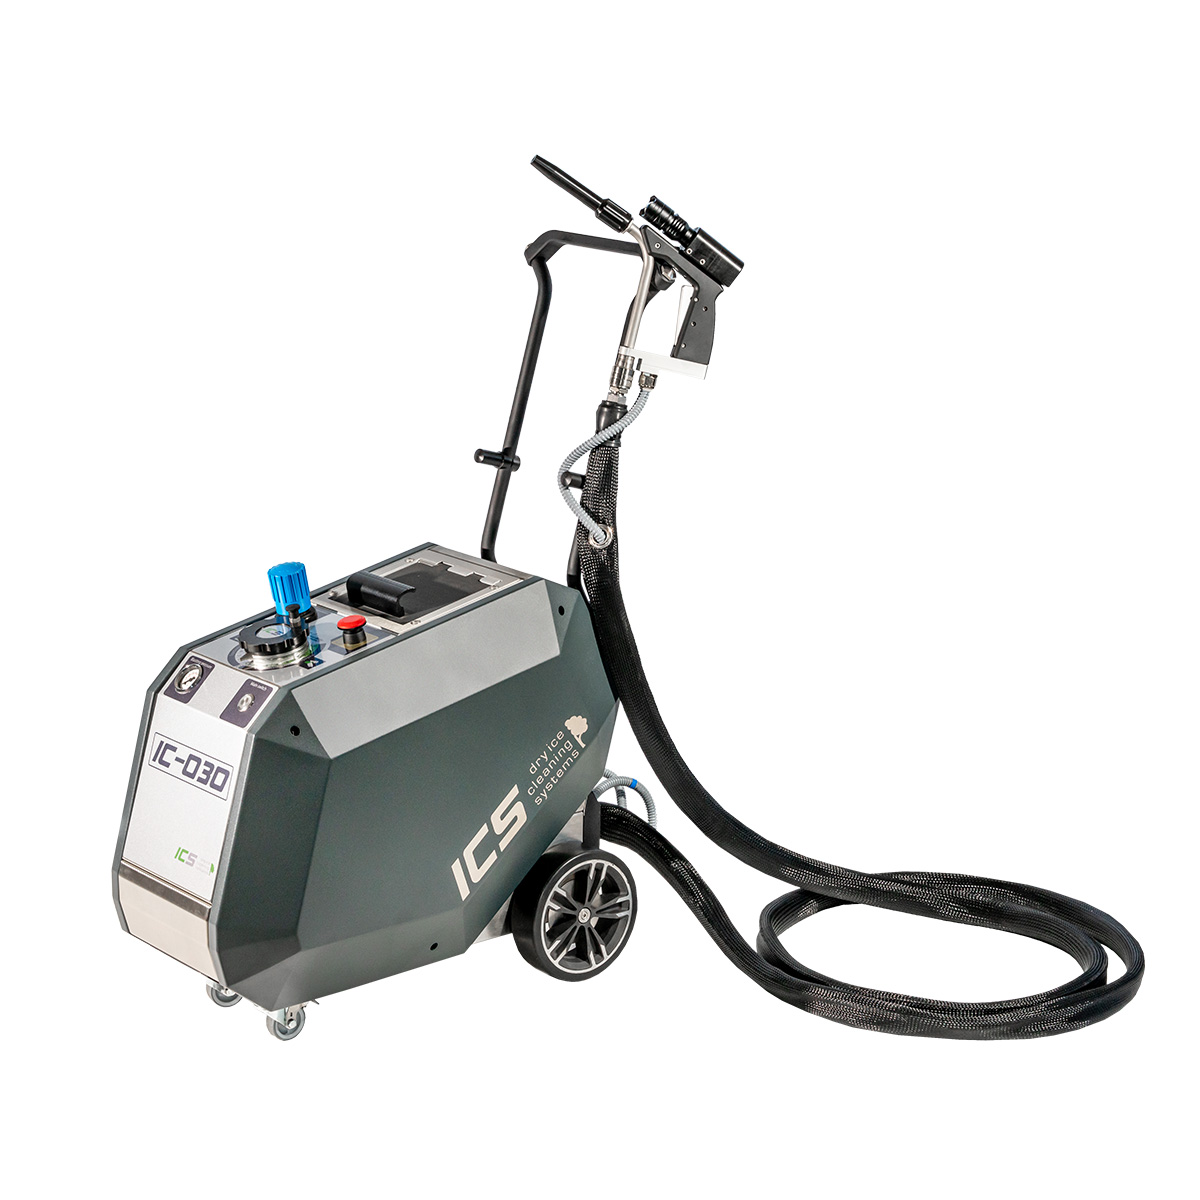 IC 030 Dry Ice Cleaning Equipment